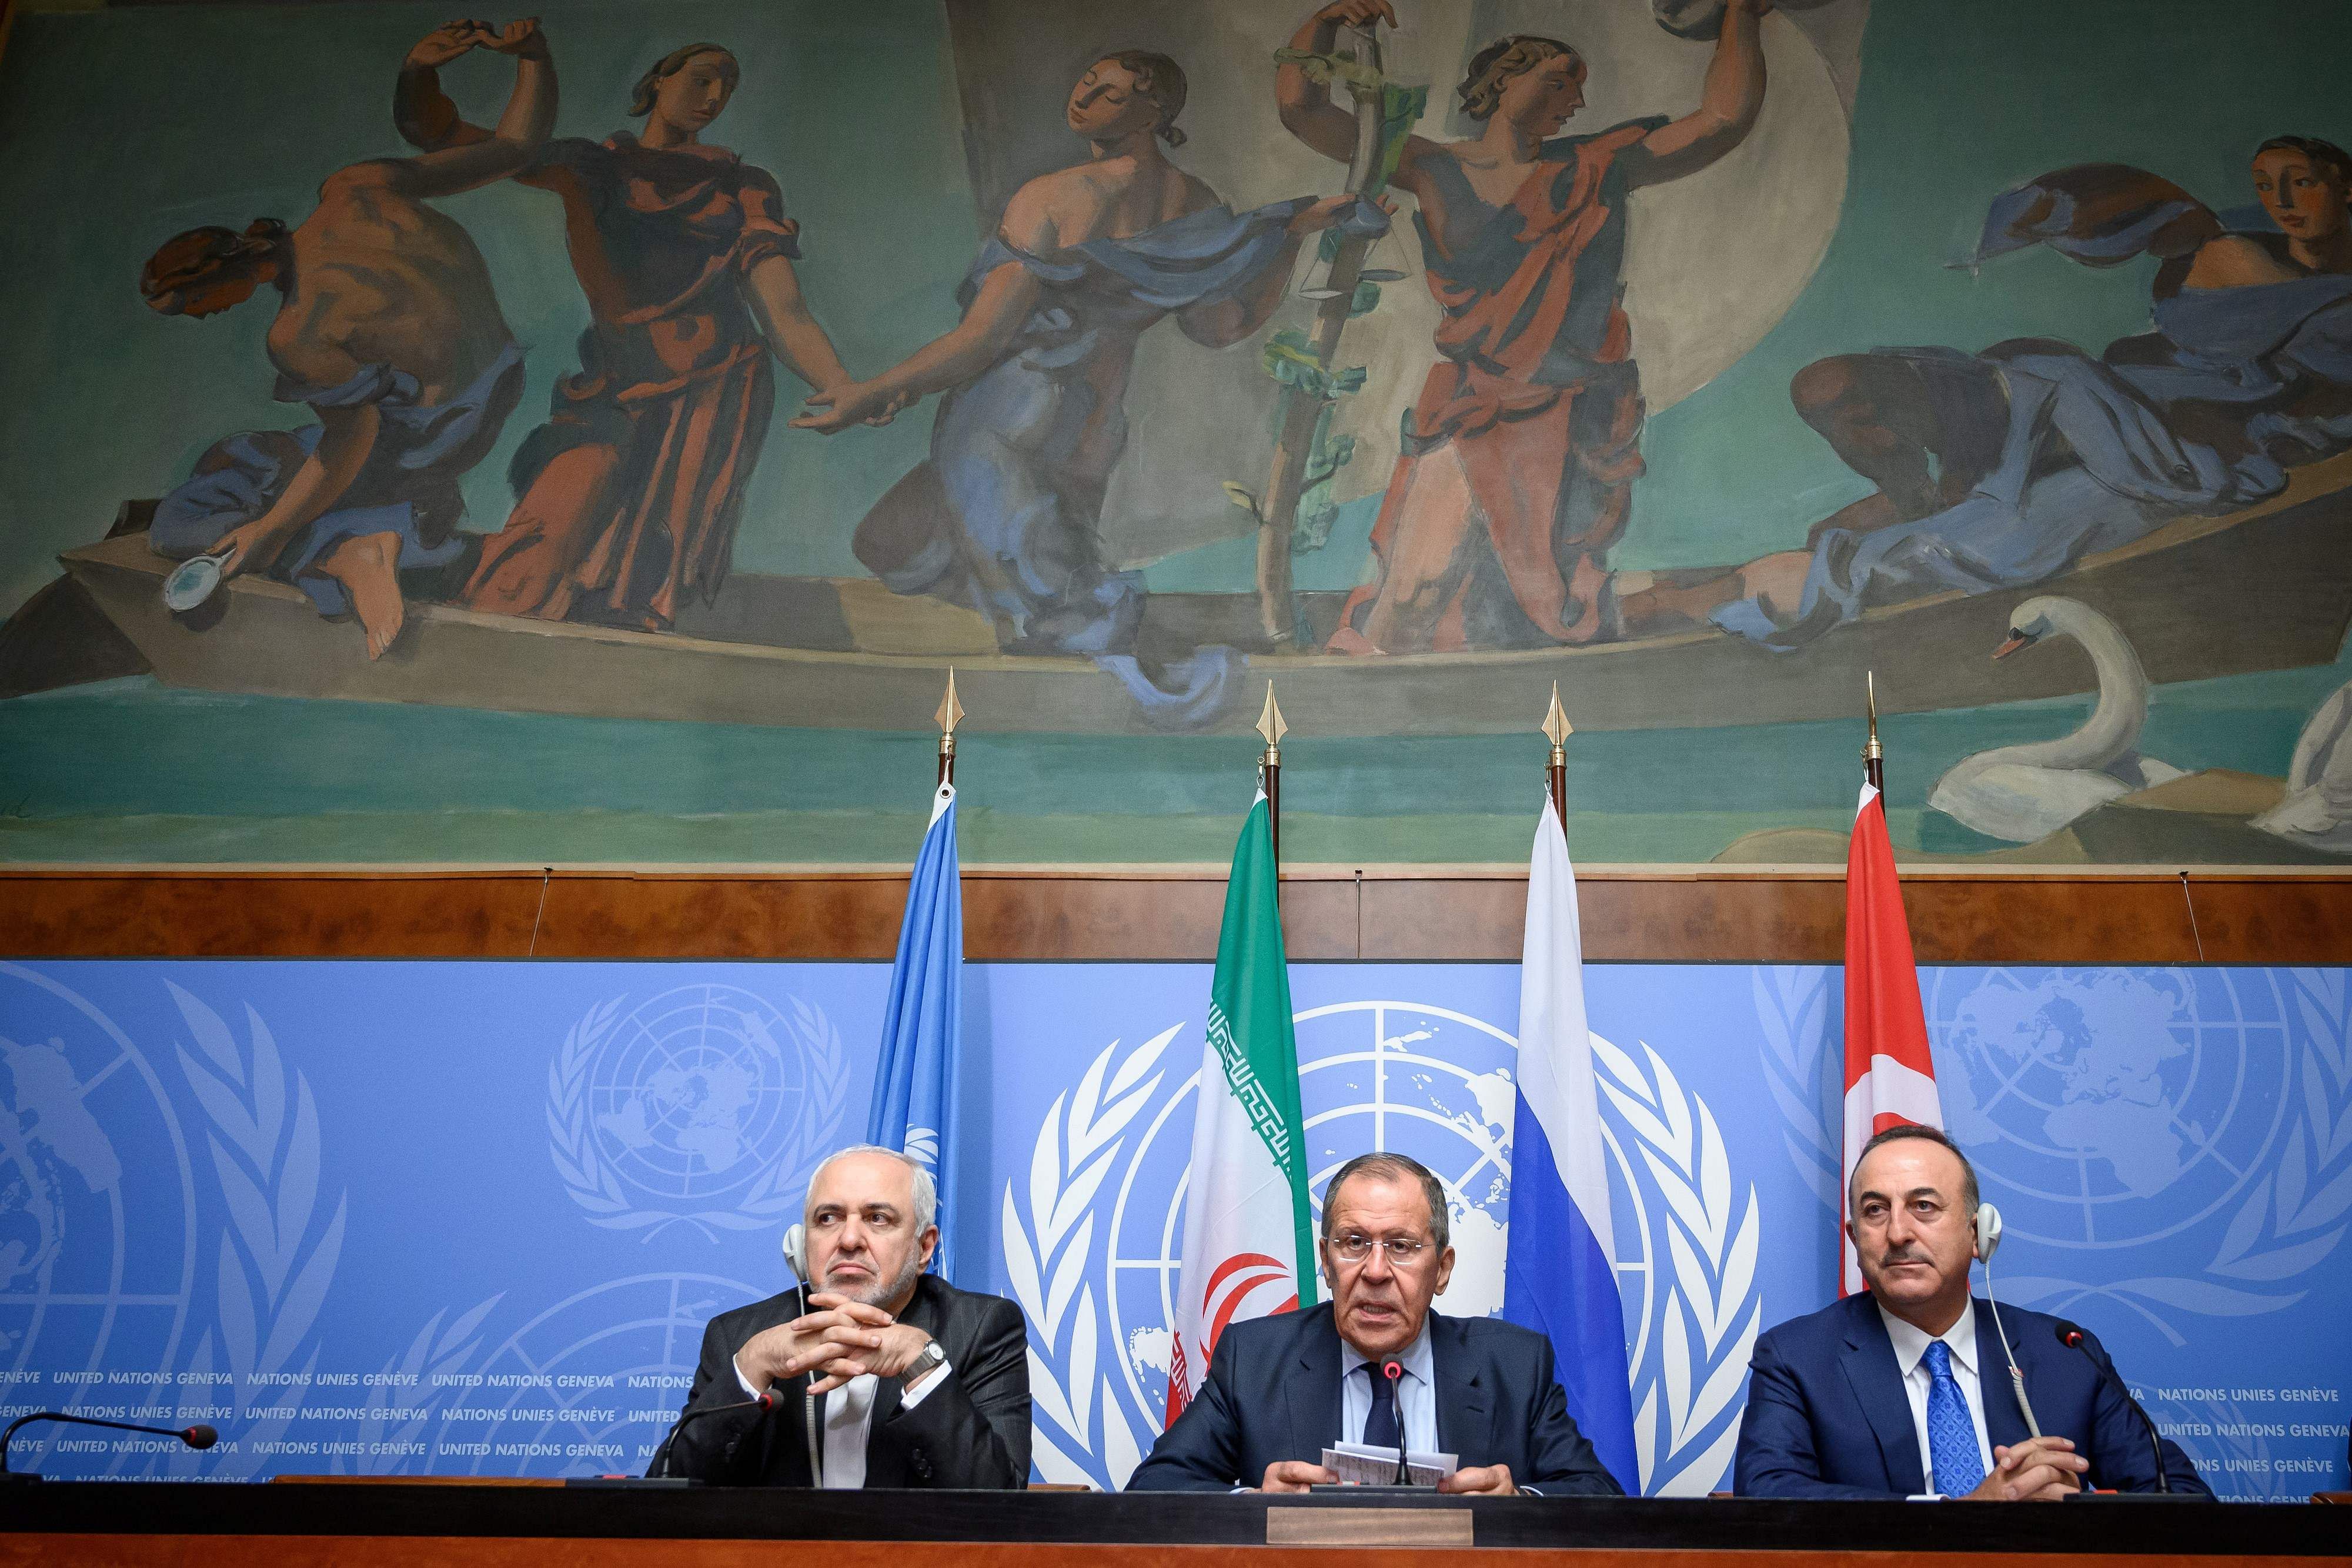  Iranian Foreign Minister Mohammad Javad Zarif, Russian Foreign Minister Sergei Lavrov and Turkish Foreign Minister Mevlut Cavusoglu give a press conference on a meeting of the Syria constitution-writing committee. (AFP Photo)